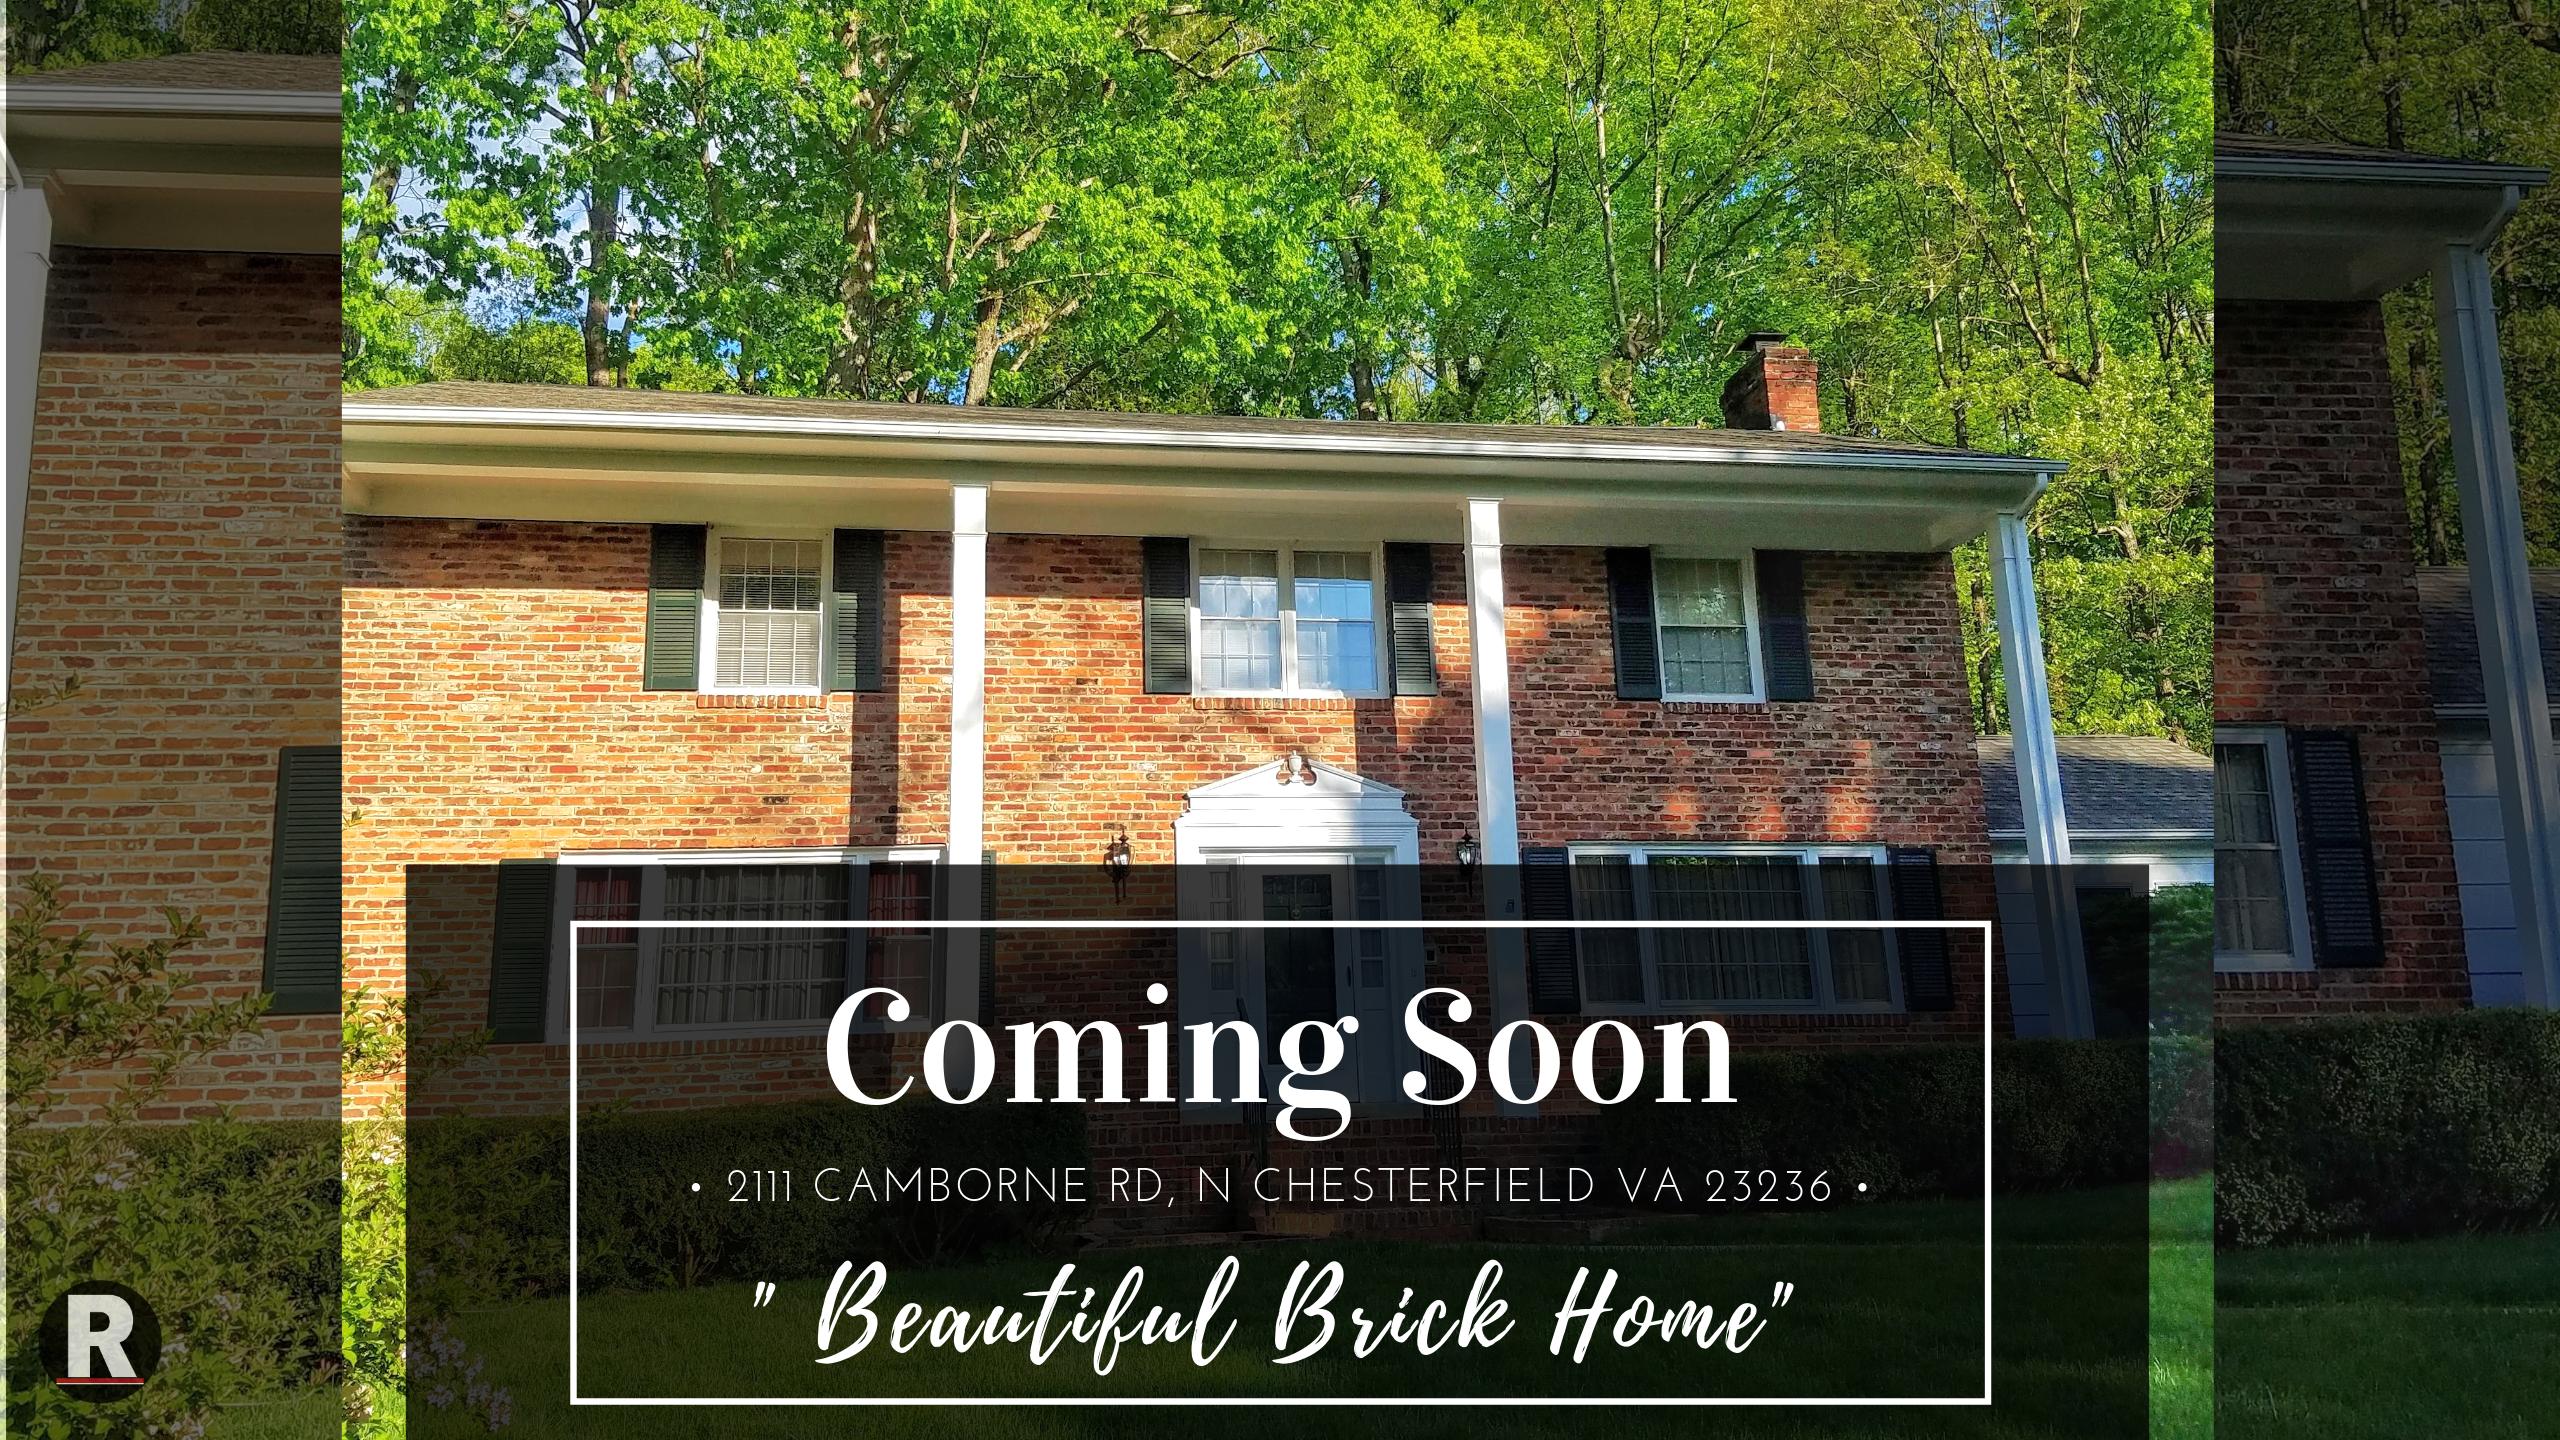 Coming Soon! 2111 Camborne Rd, N Chesterfield VA 23236